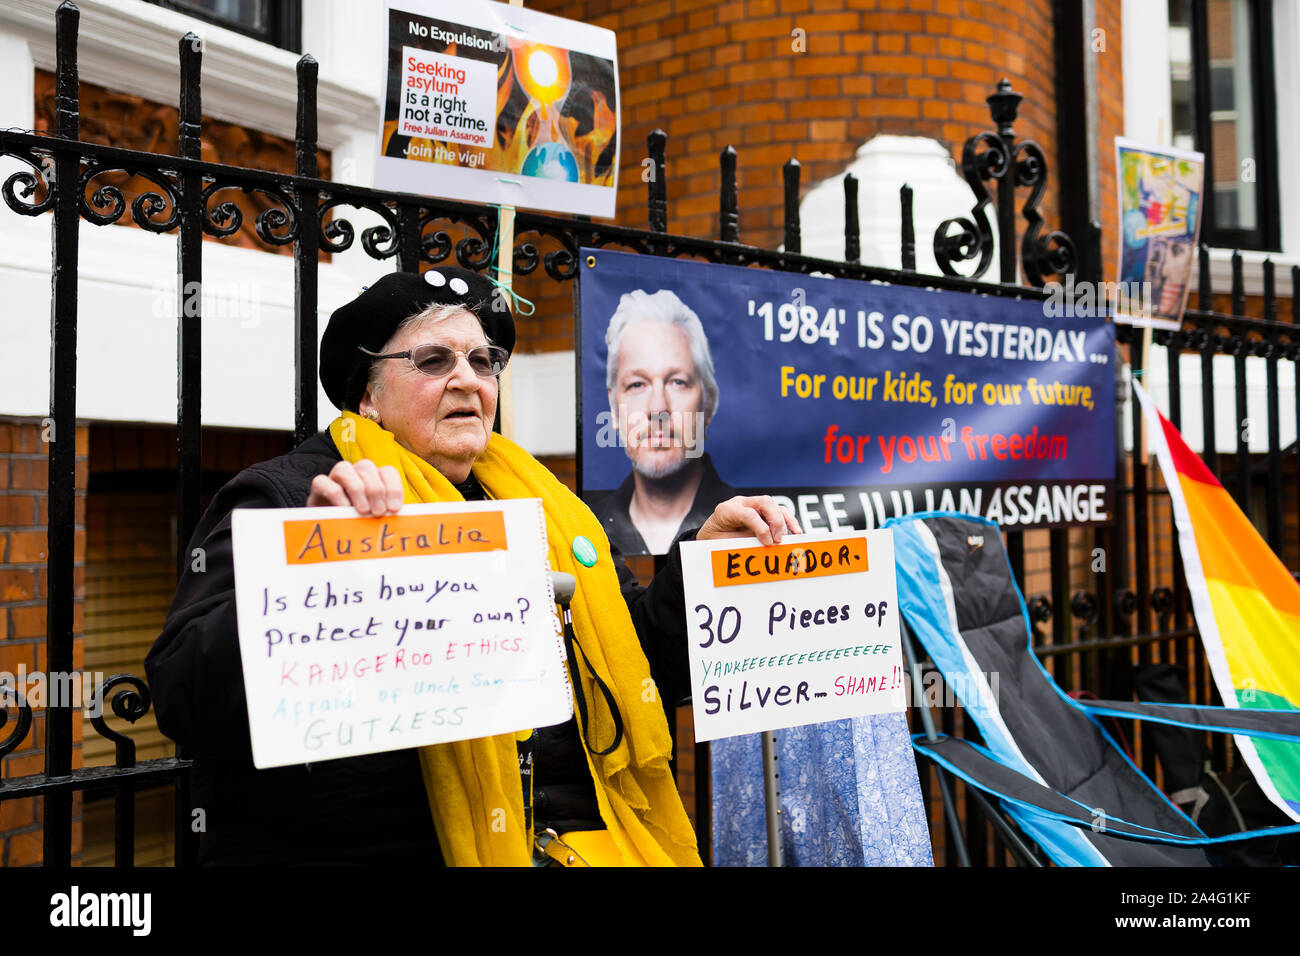 London, UK. A woman holds signs protesting the treatment of Julian Assange outside the Ecuadorian Embassy. Assange has been in the embassy since Augus Stock Photo